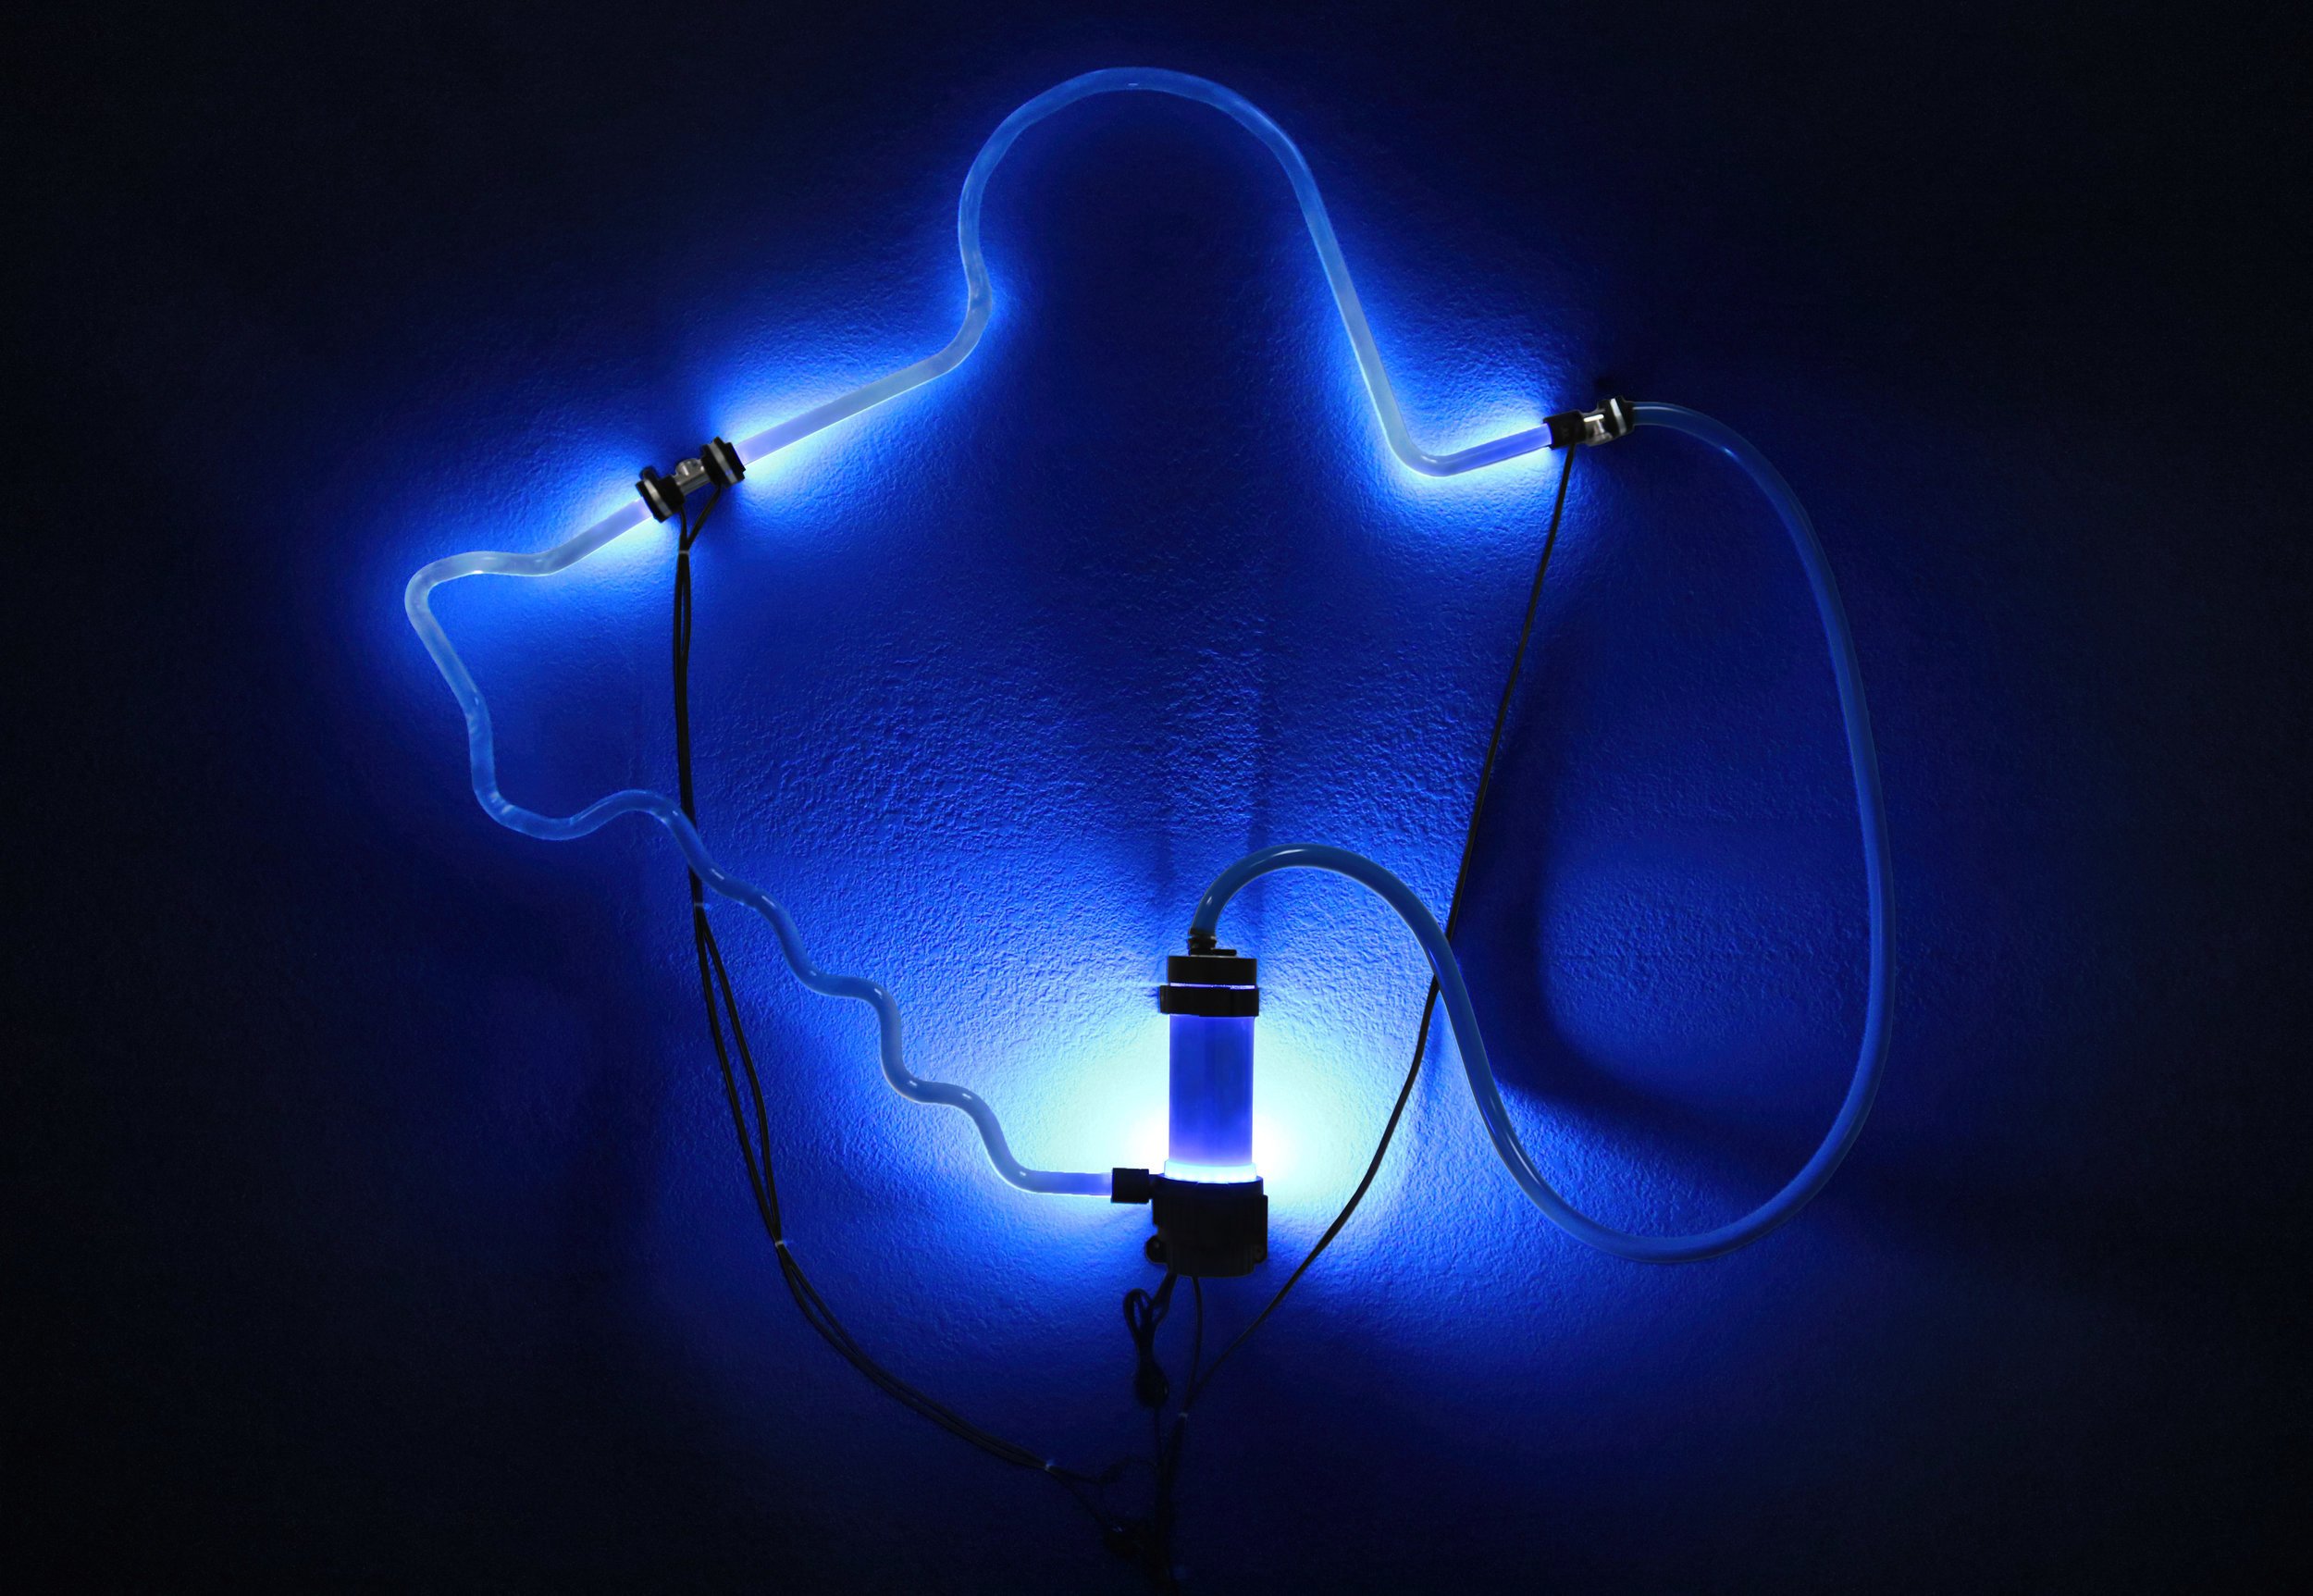  Filip Kostic,  Closed Loop (Blue),  Heat-bent PETG tubing, LED compression fittings, pump and reservoir, computer power supply, coolant, 2017 